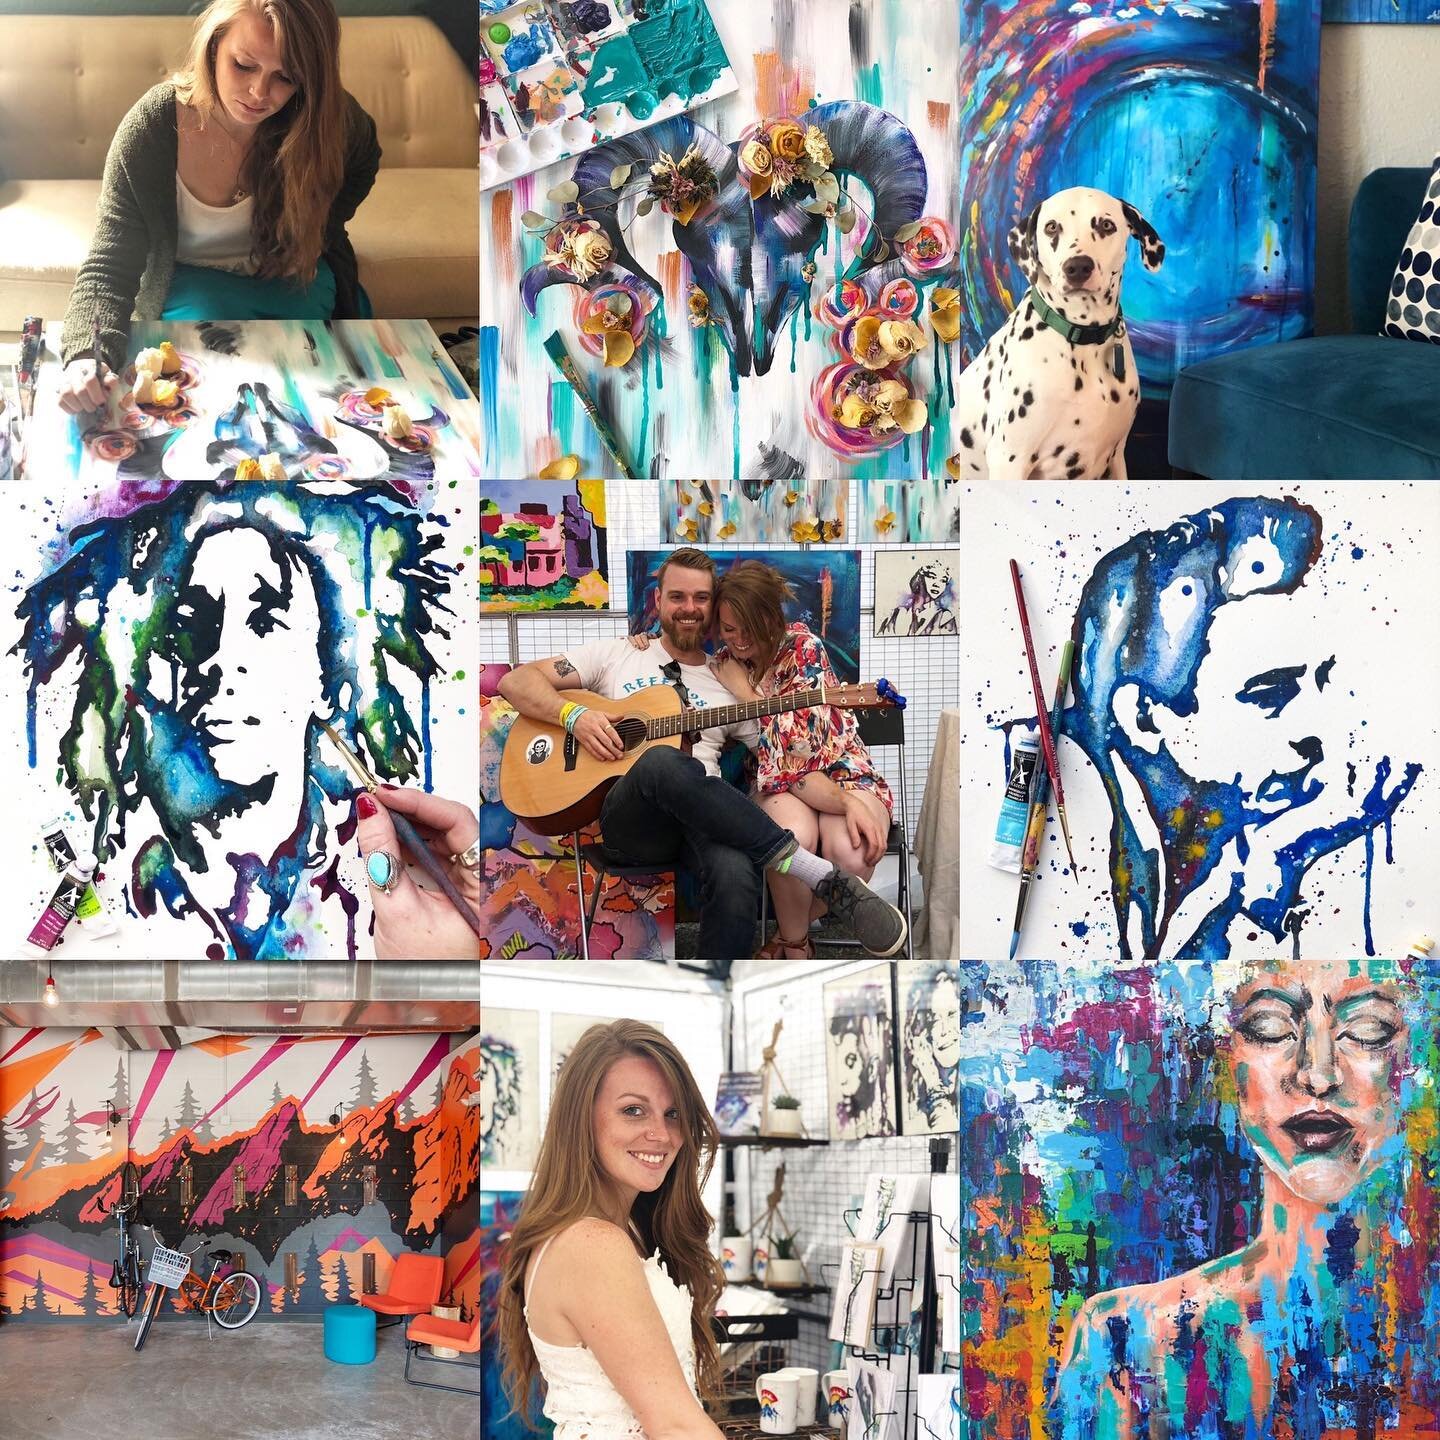 I hope you all had an amazing holiday with family and friends! Here are some of my best artistic moments of 2019 for #topnine - I continued to paint watercolor portraits of Johnny Cash and Bob Marley, but I also worked my way back to my first love...